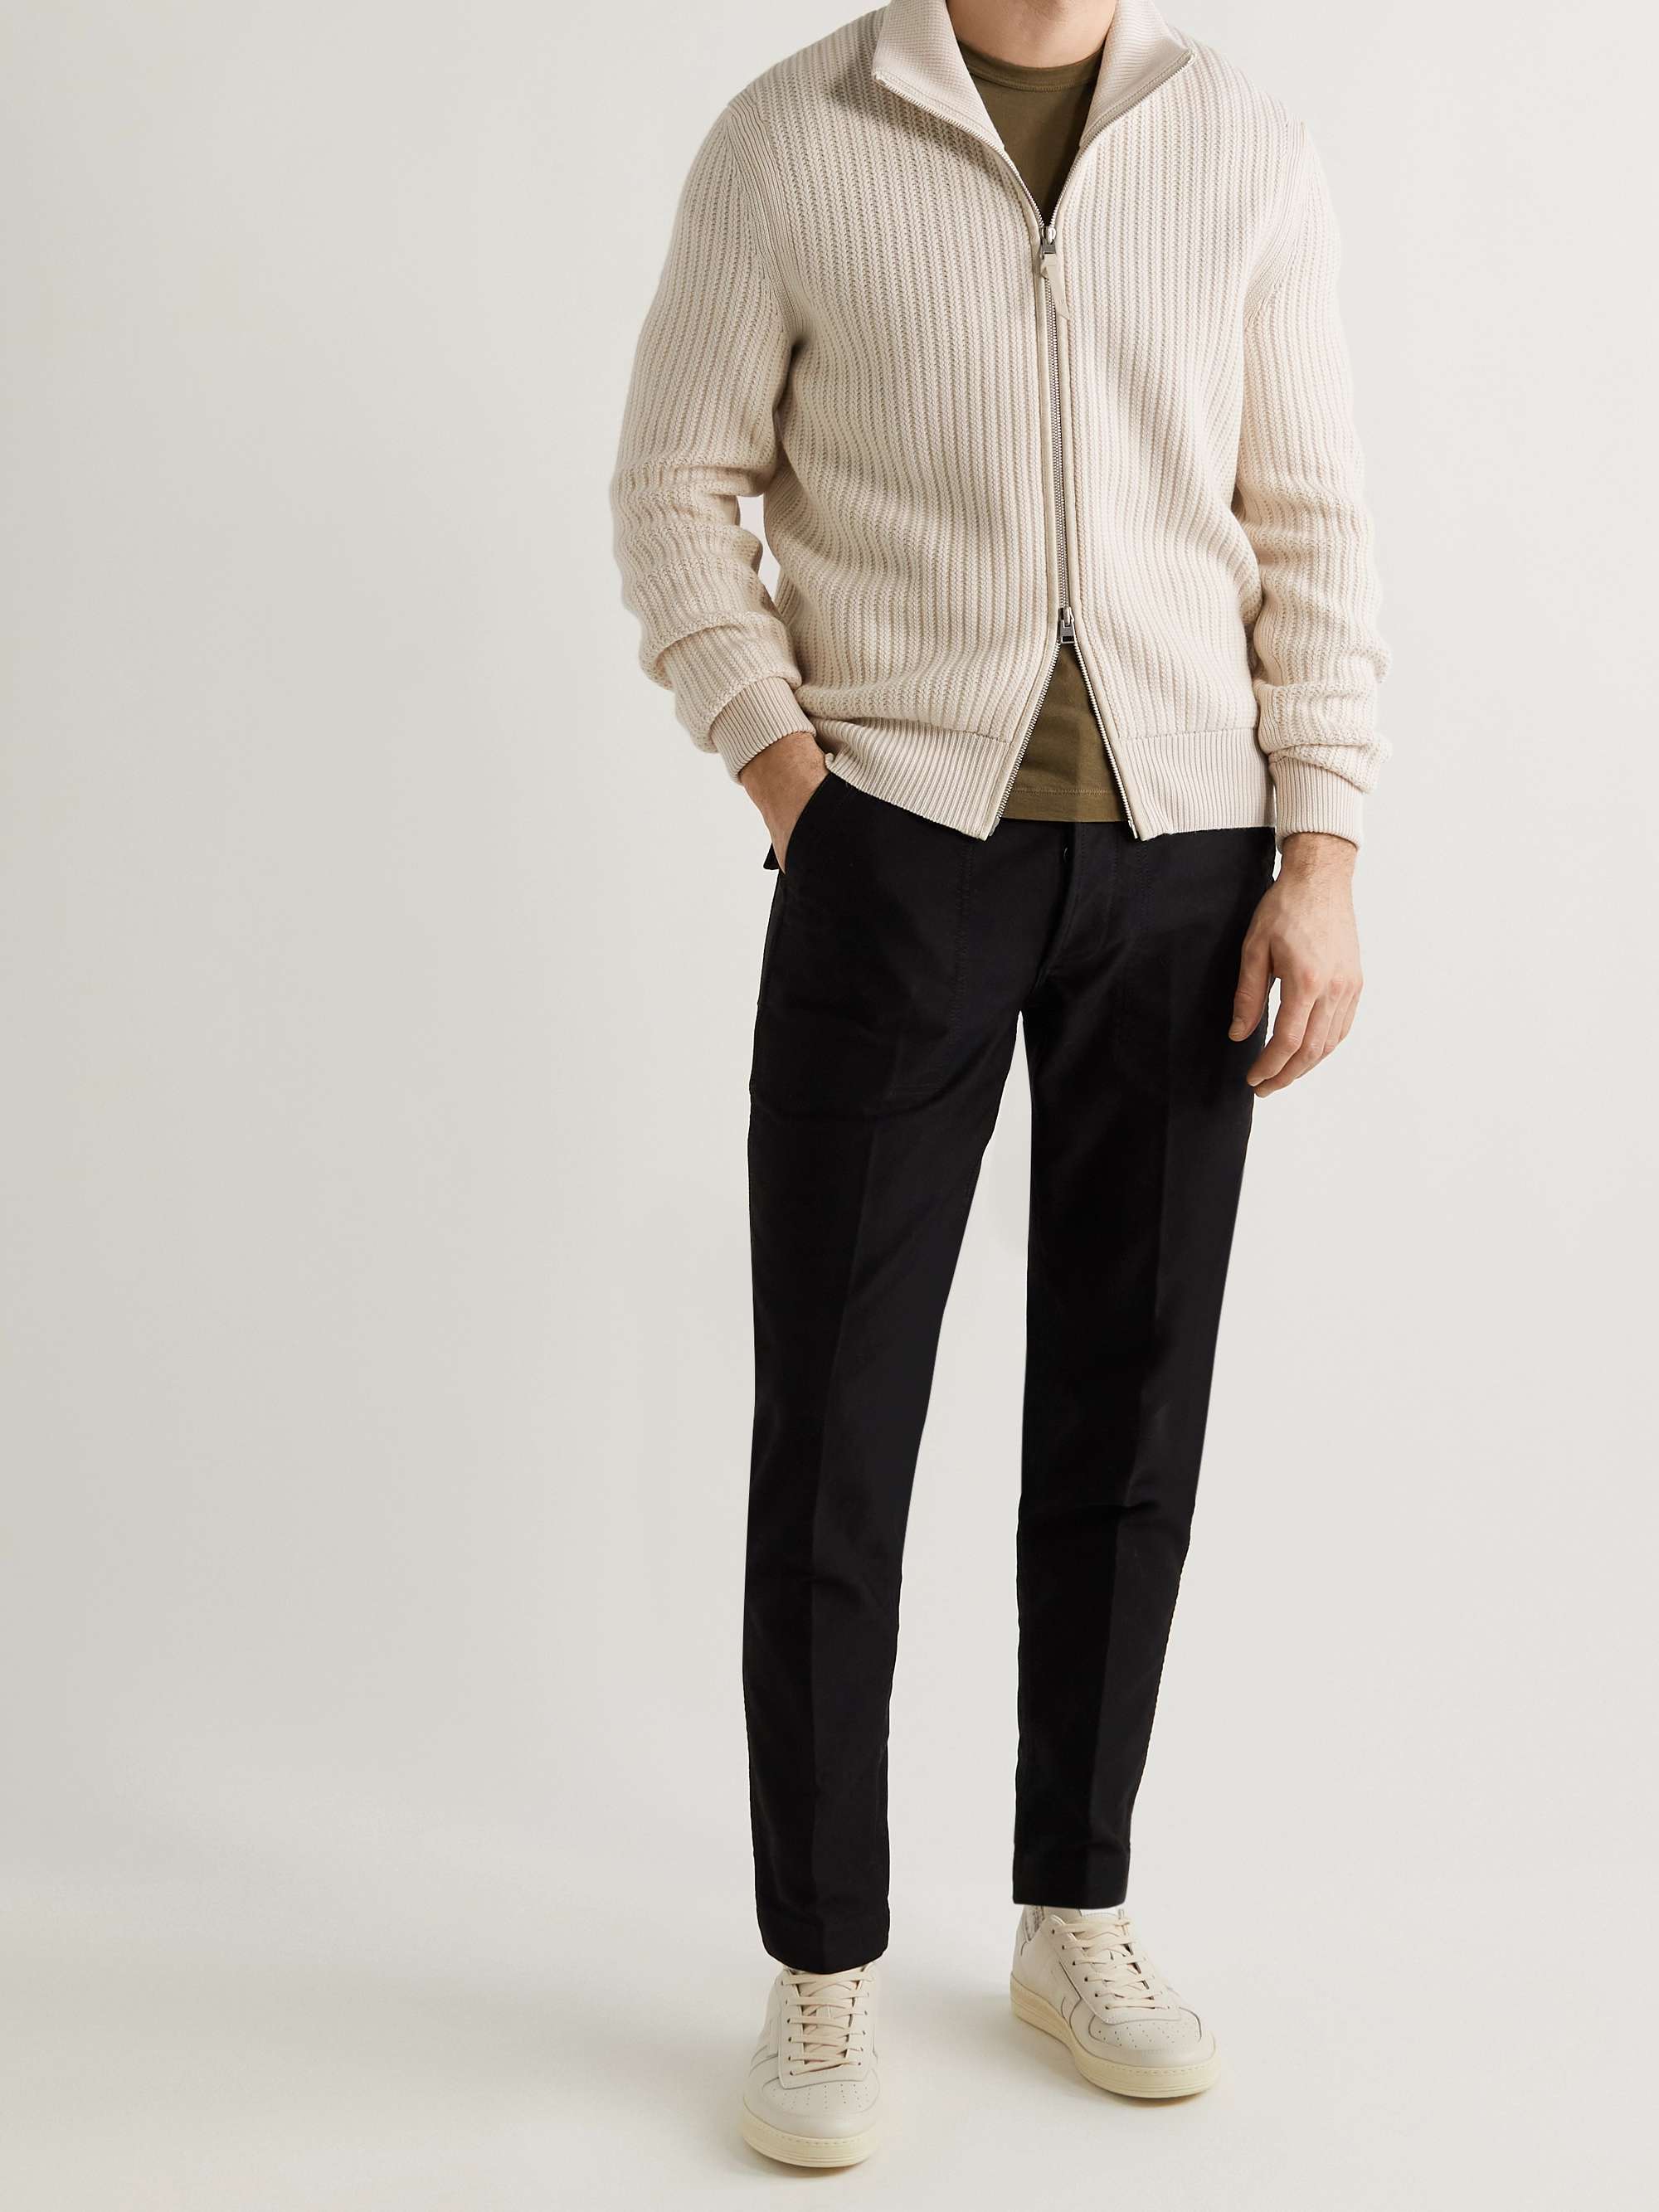 TOM FORD Leather-Trimmed Ribbed Wool and Cashmere-Blend Zip-Up Cardigan